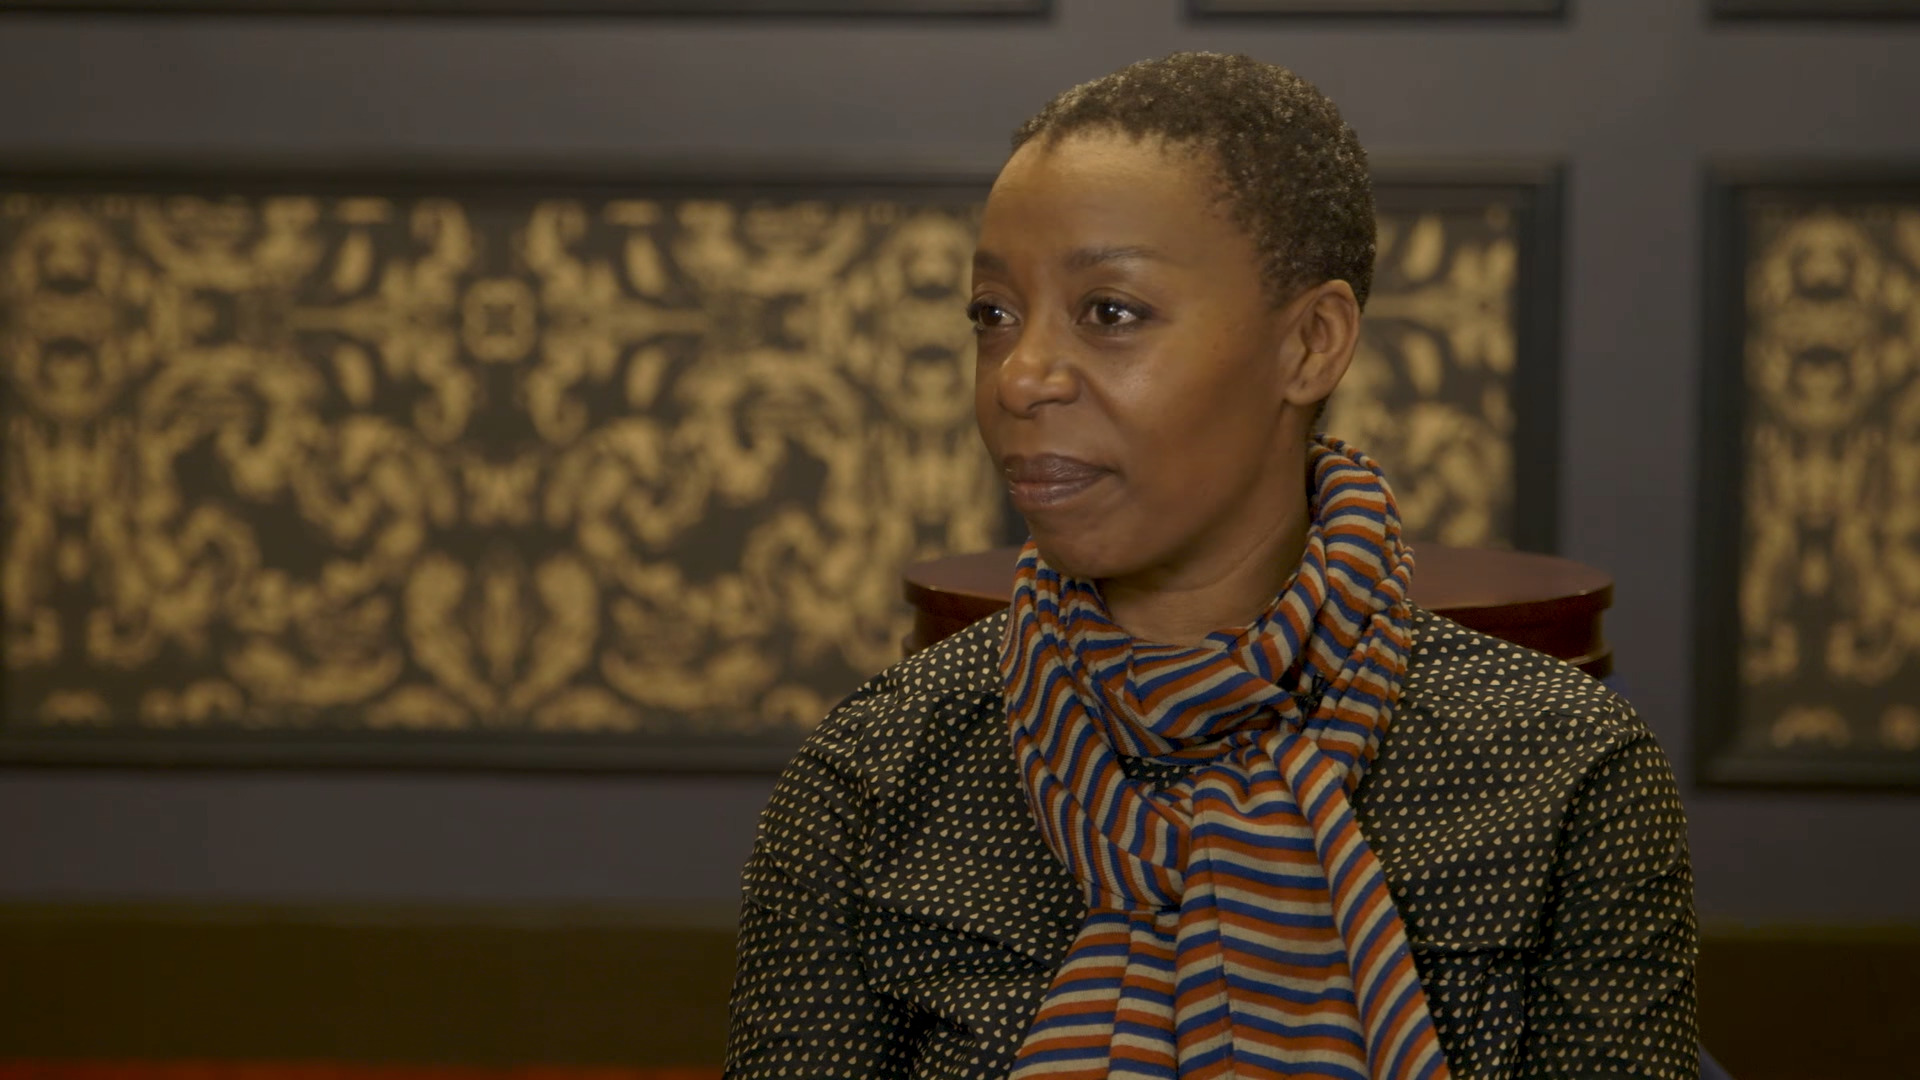 Noma Dumezweni speaks about her experience portraying Hermoine in the stage production of 'Harry Potter and the Cursed Child'